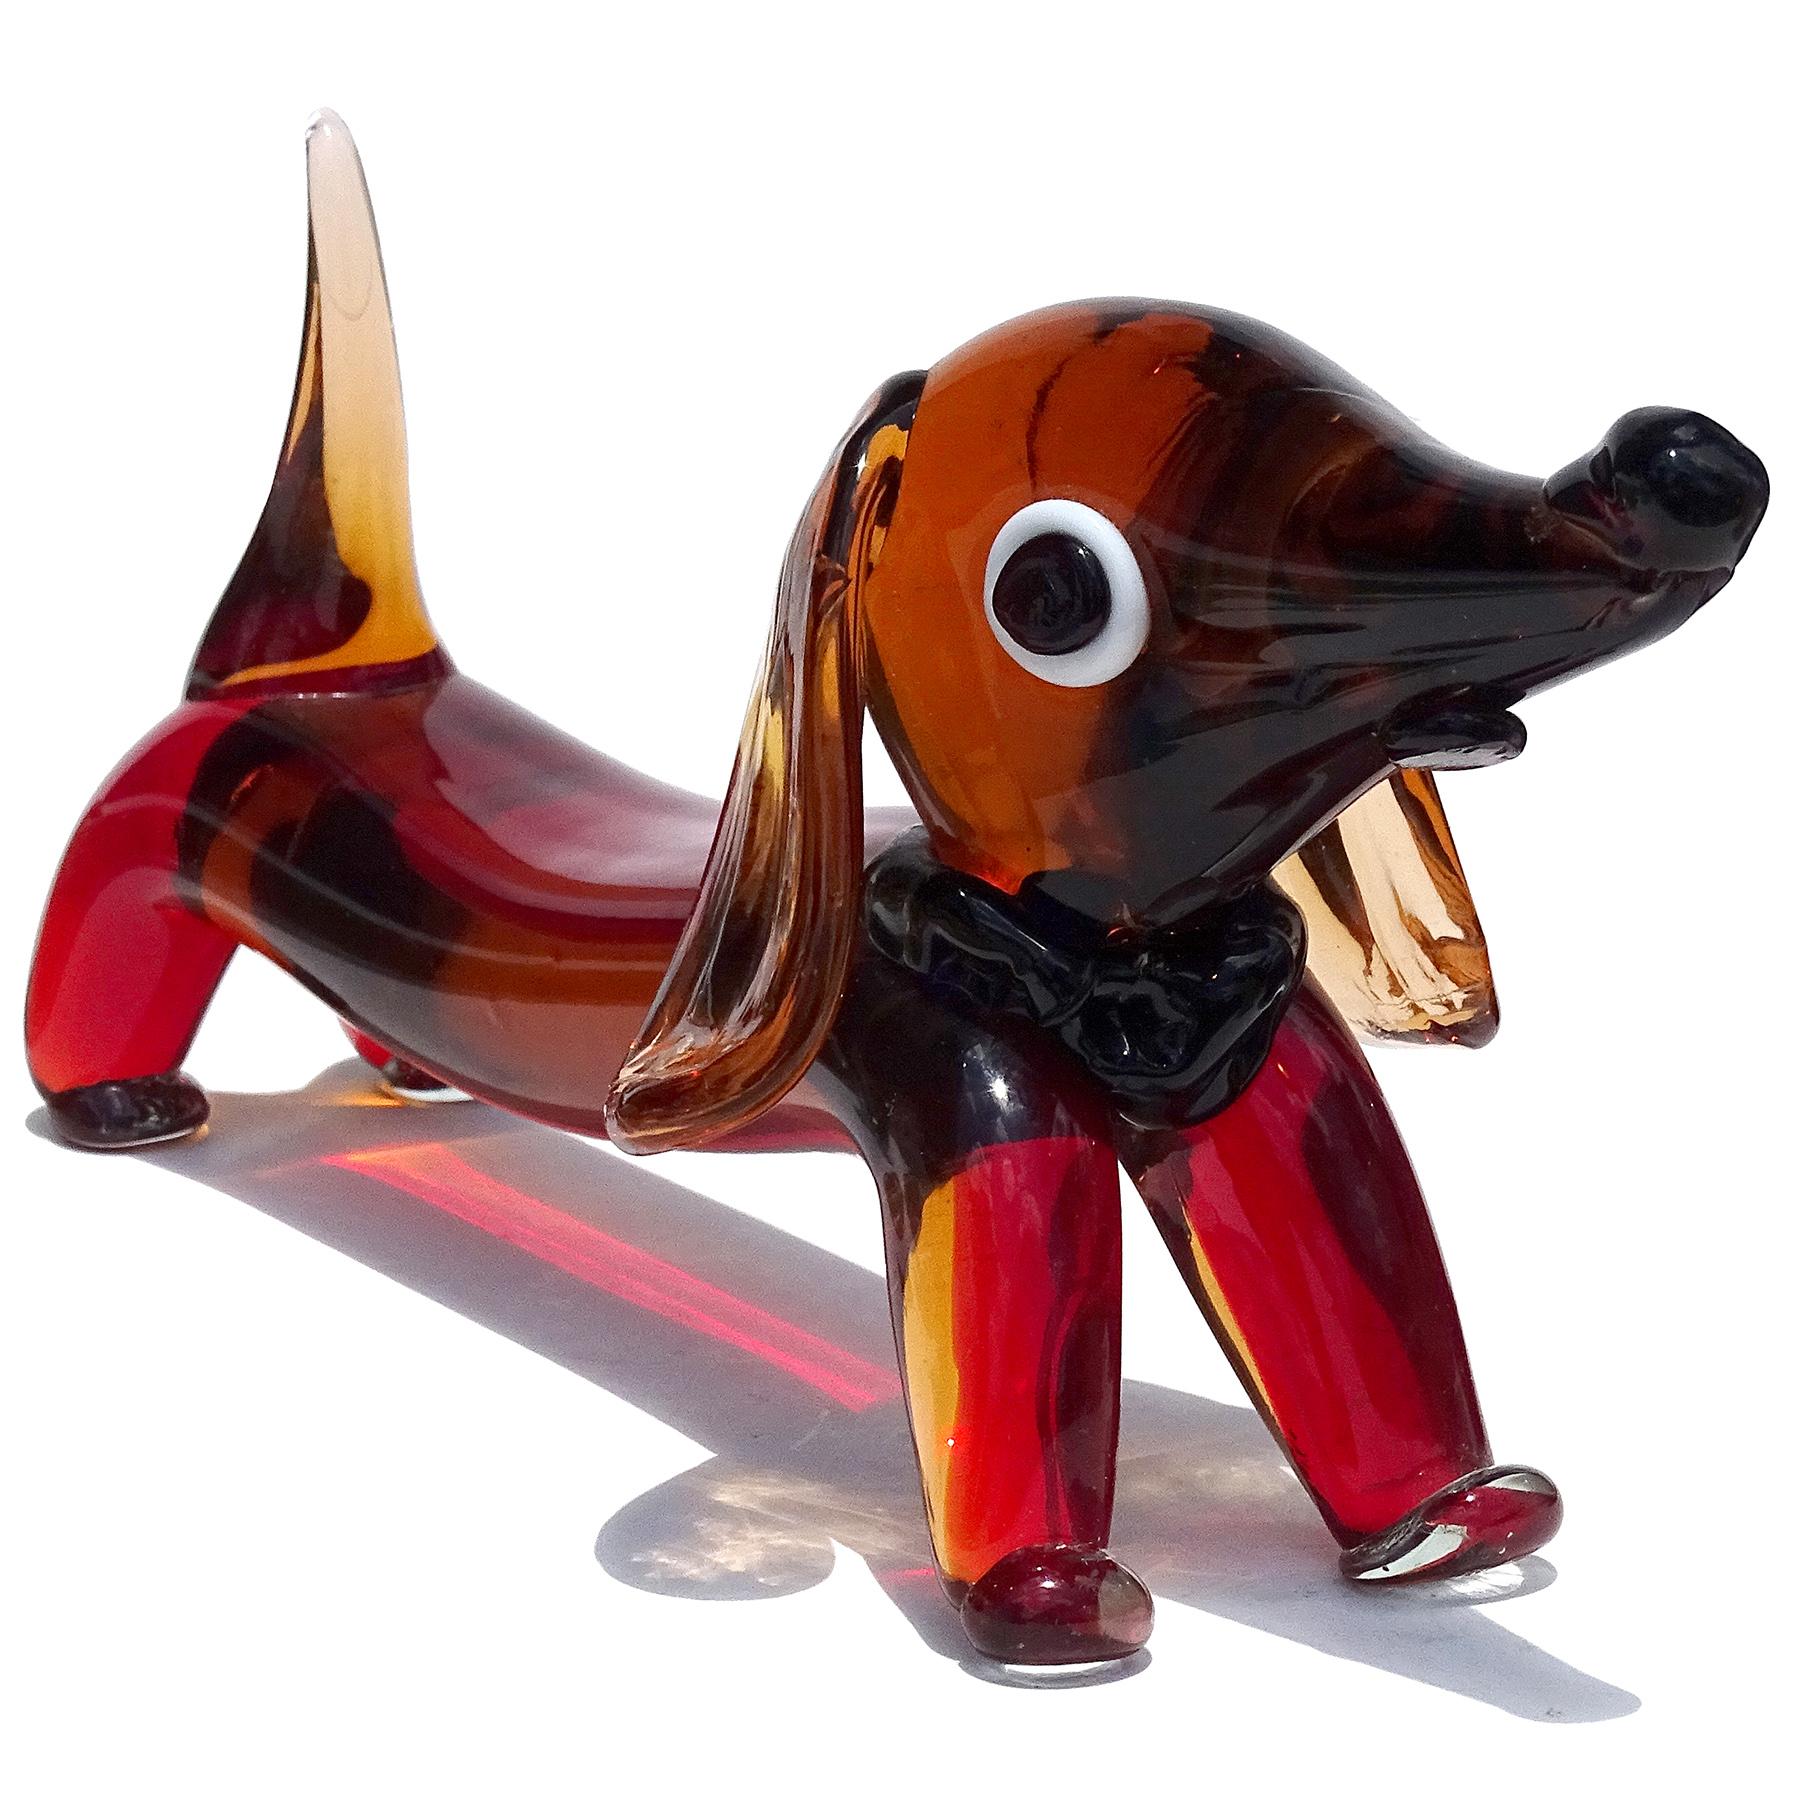 Hand-Crafted Murano Vintage Sommerso Red Orange Italian Art Glass Dachshund Dog Sculpture For Sale